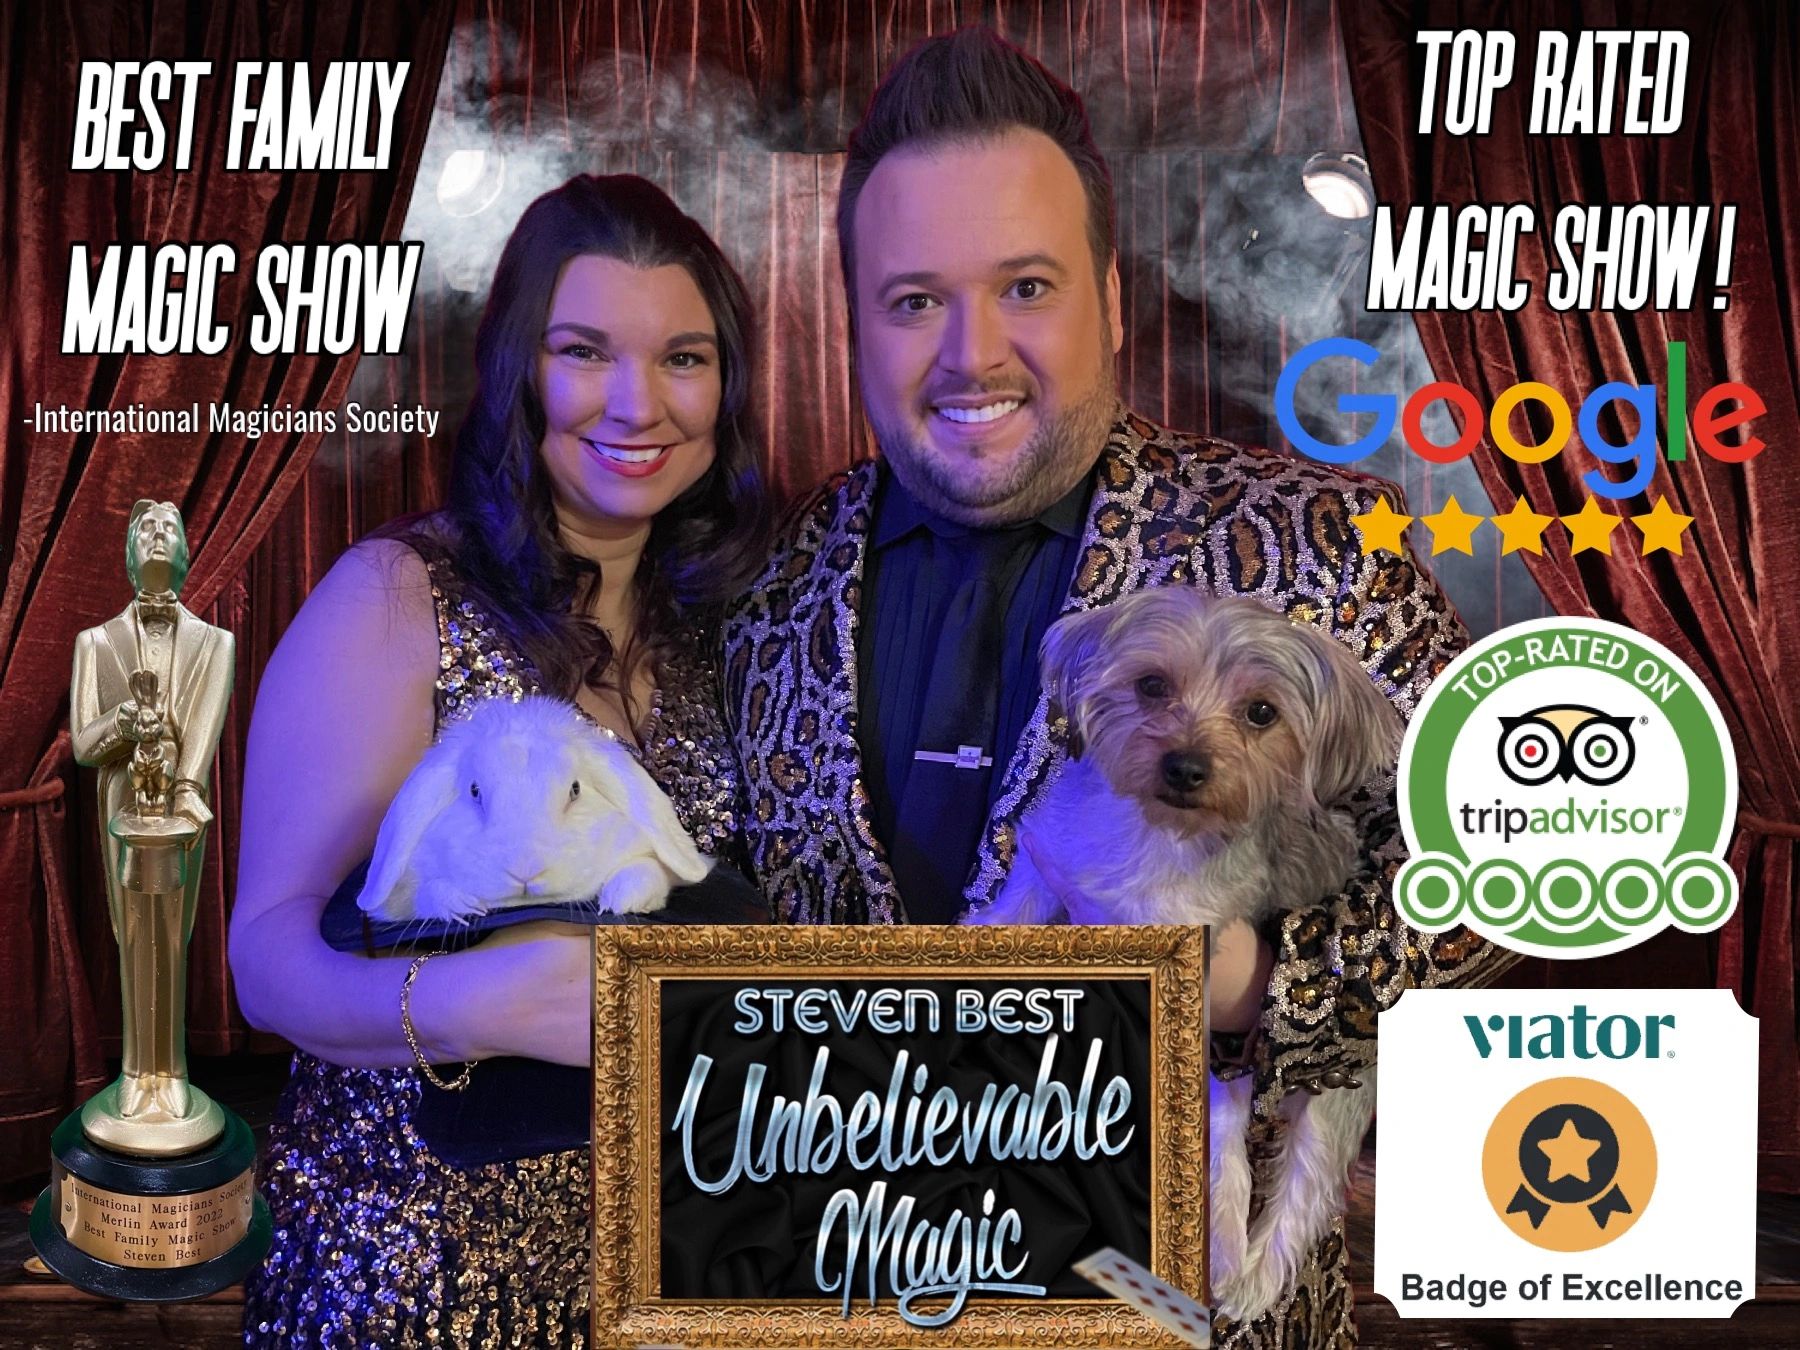 Pigeon Forge Magic Show Tickets best magic show in the smoky mountains
